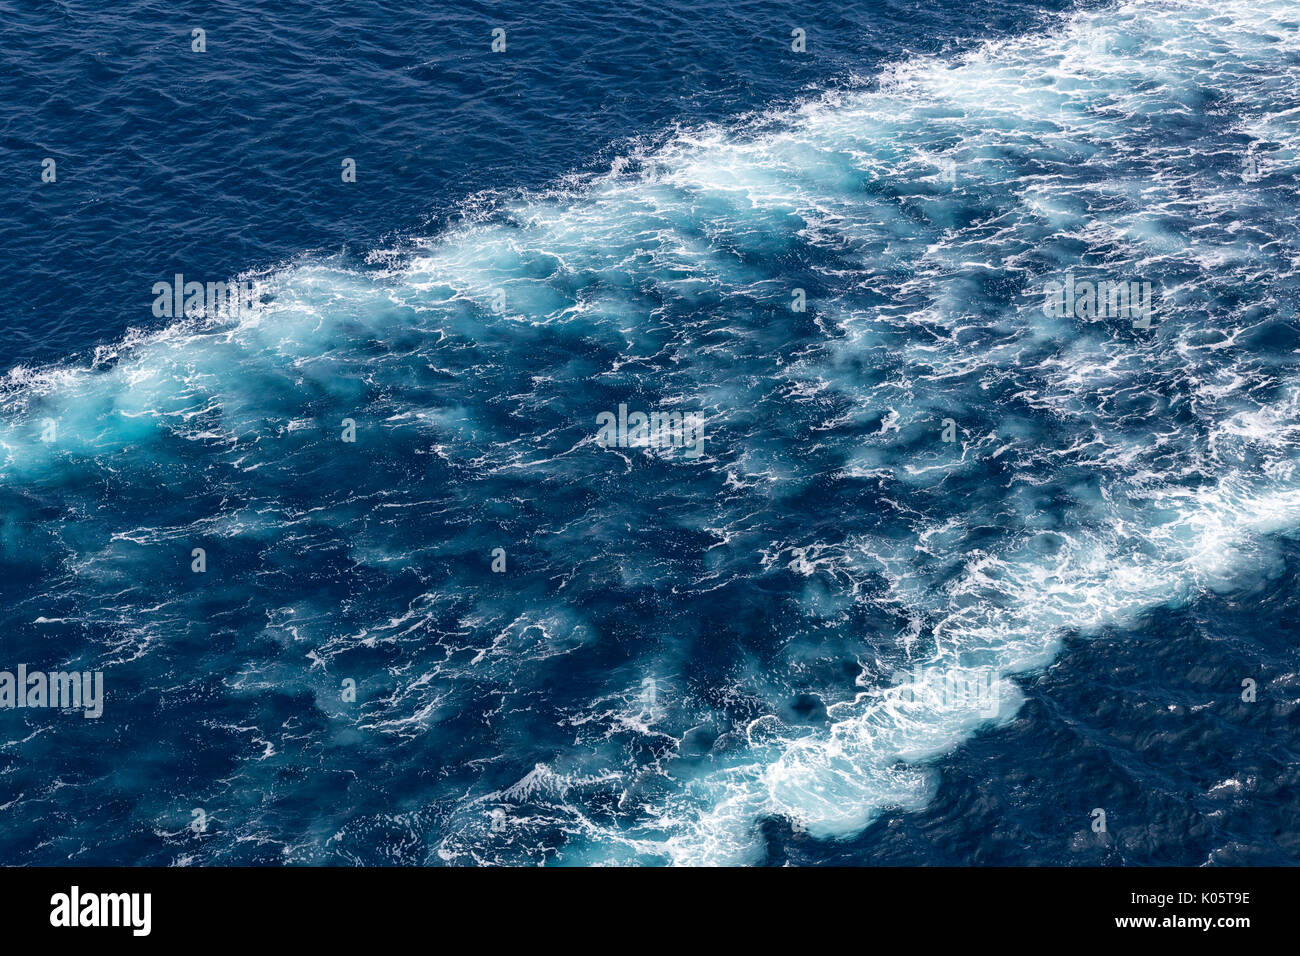 A Ship's Wake in the Caribbean. Stock Photo